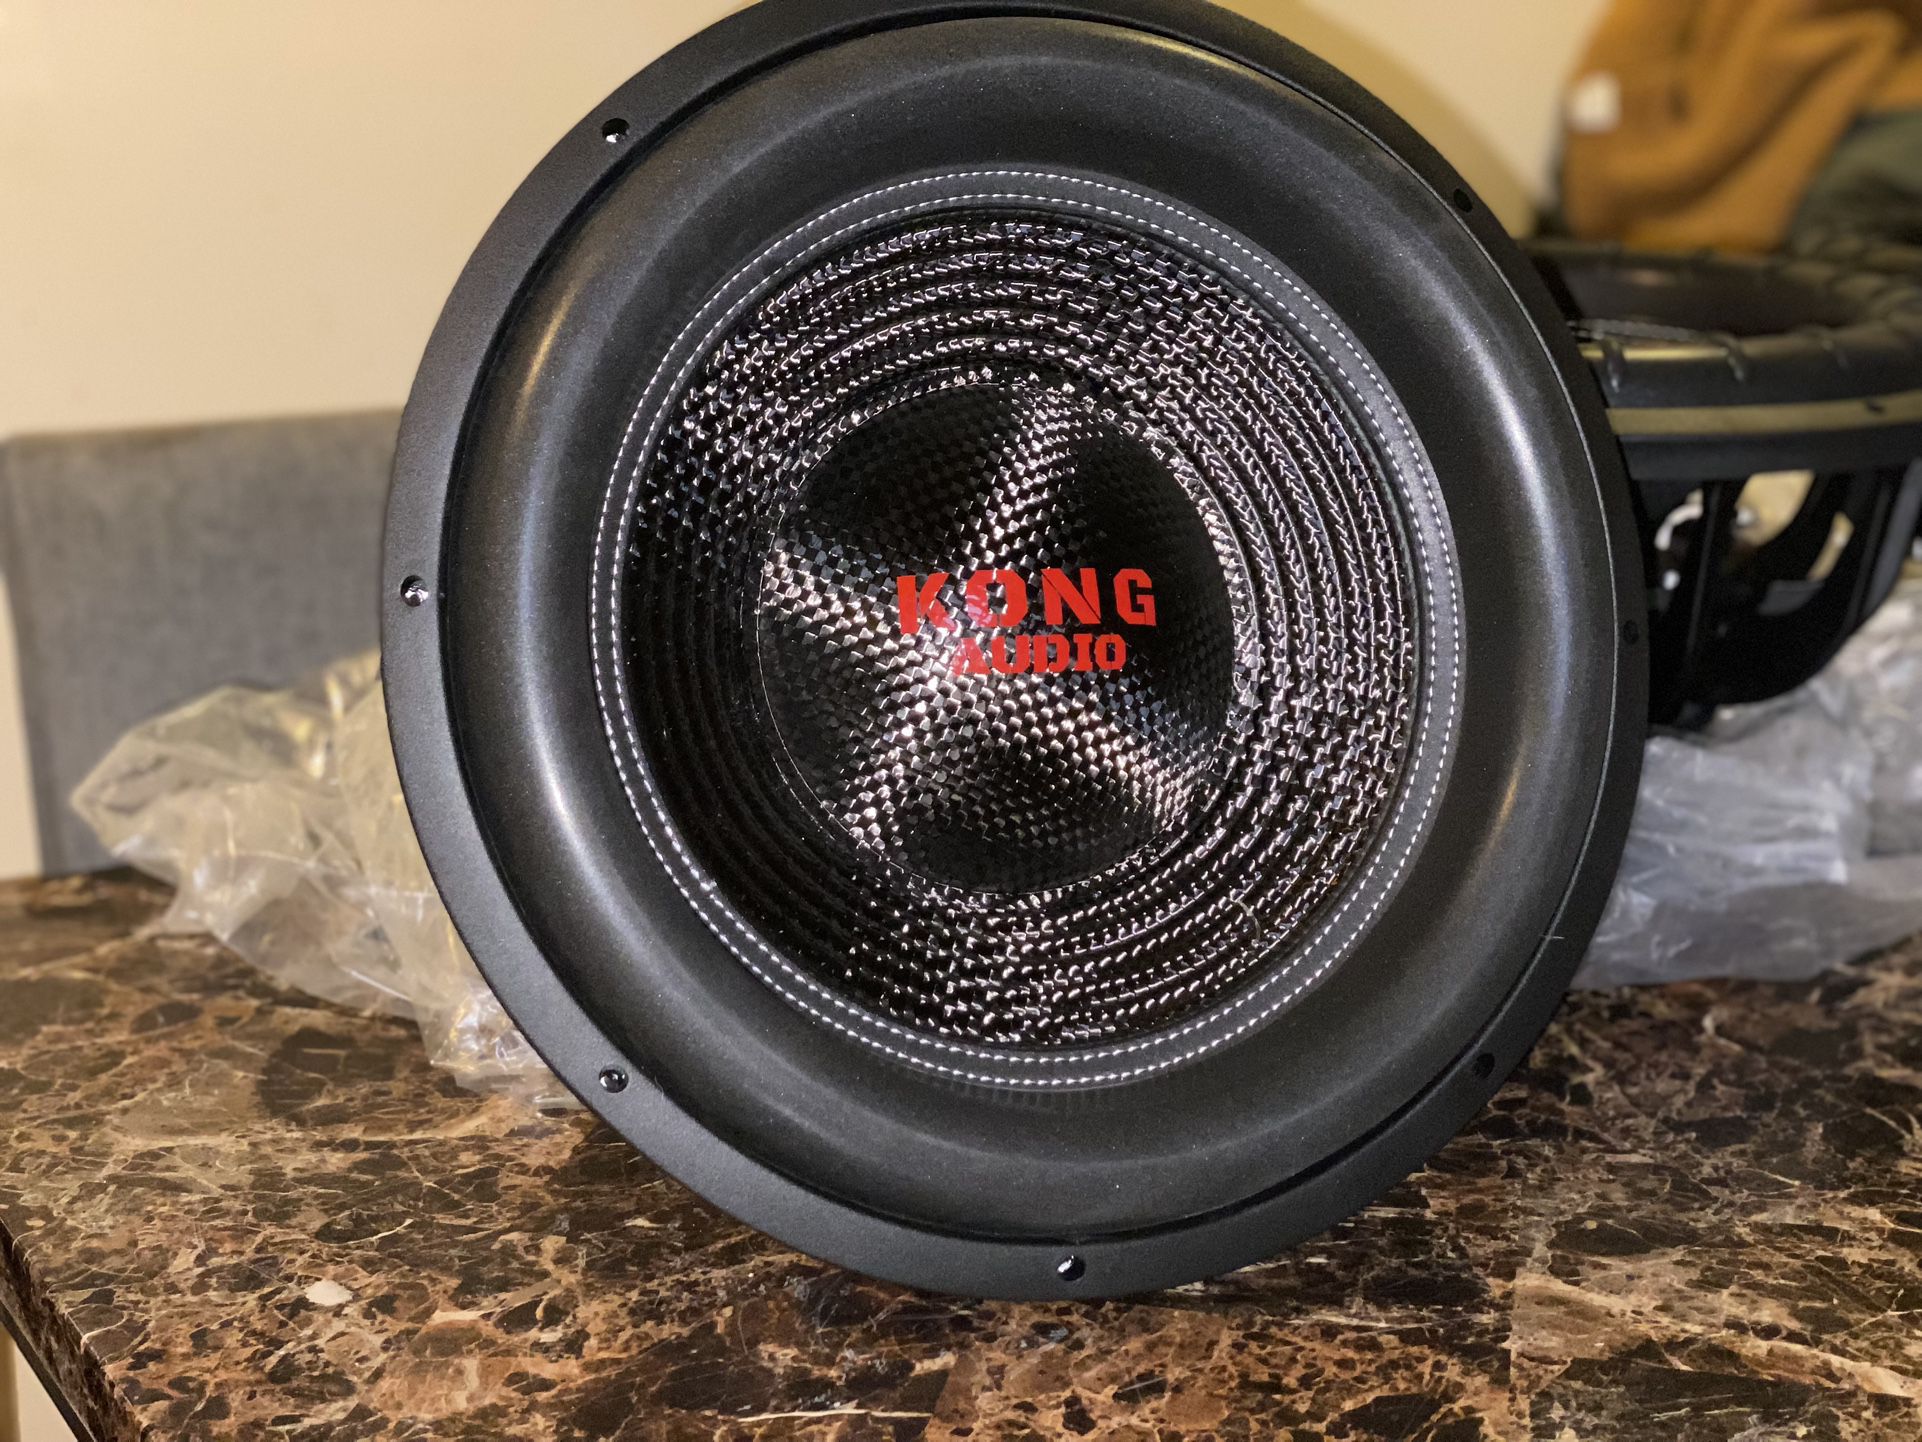 New 15"Kong Audio Neodymium 8000w max power spl subwoofer  $650 - one available  